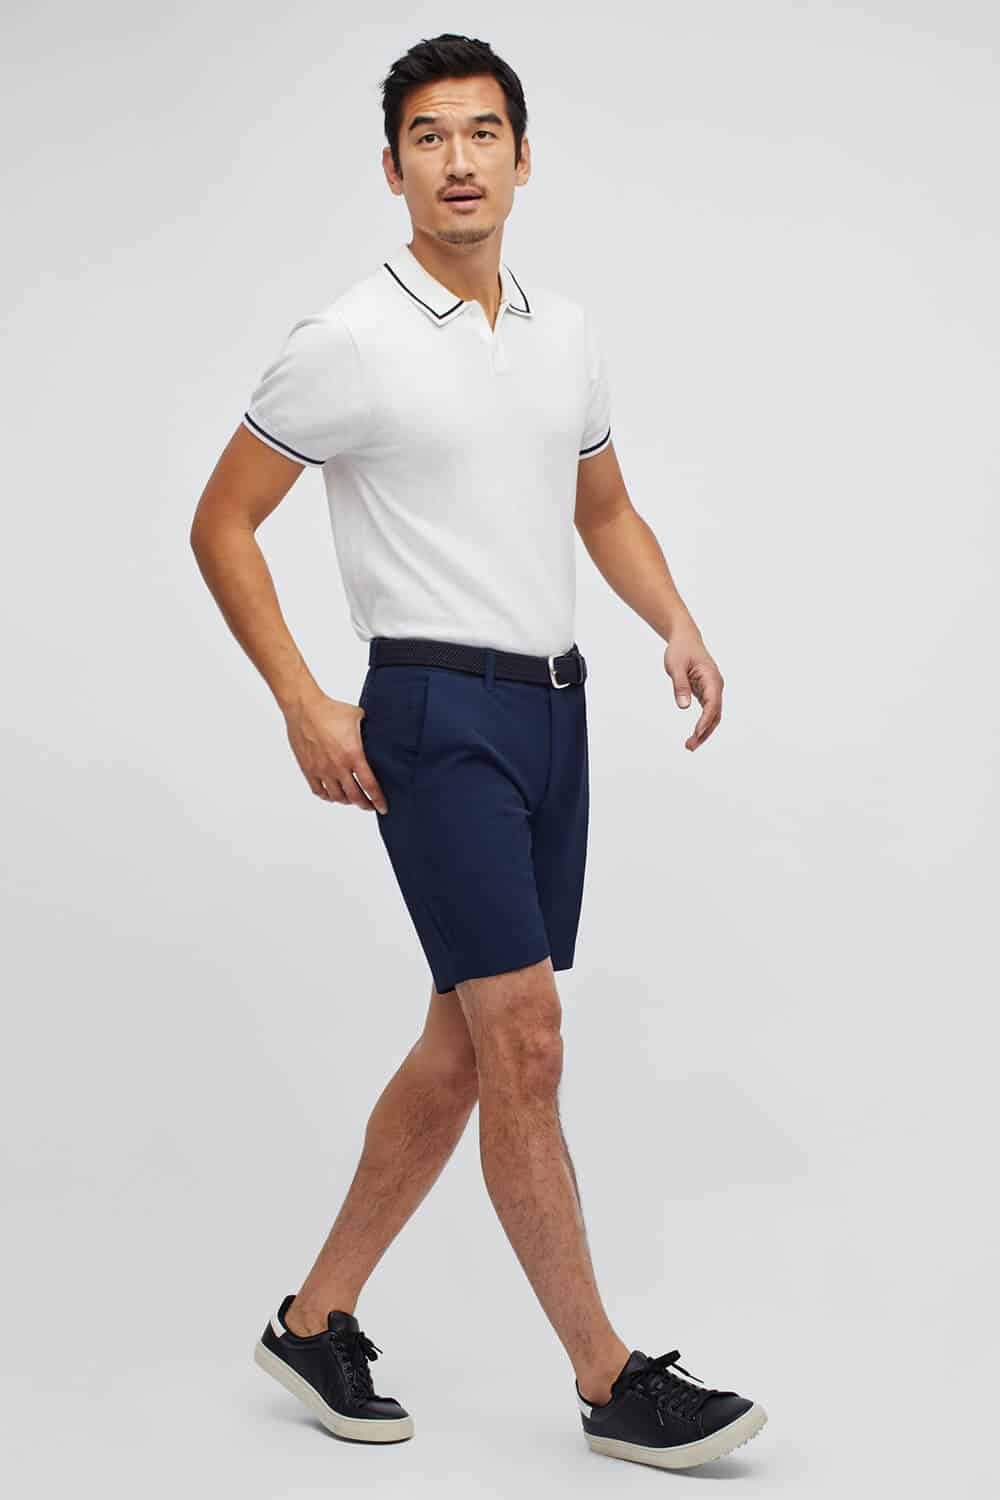 Polo Shirt Outfit Inspiration For Men: 20 Cool Looks For 2023